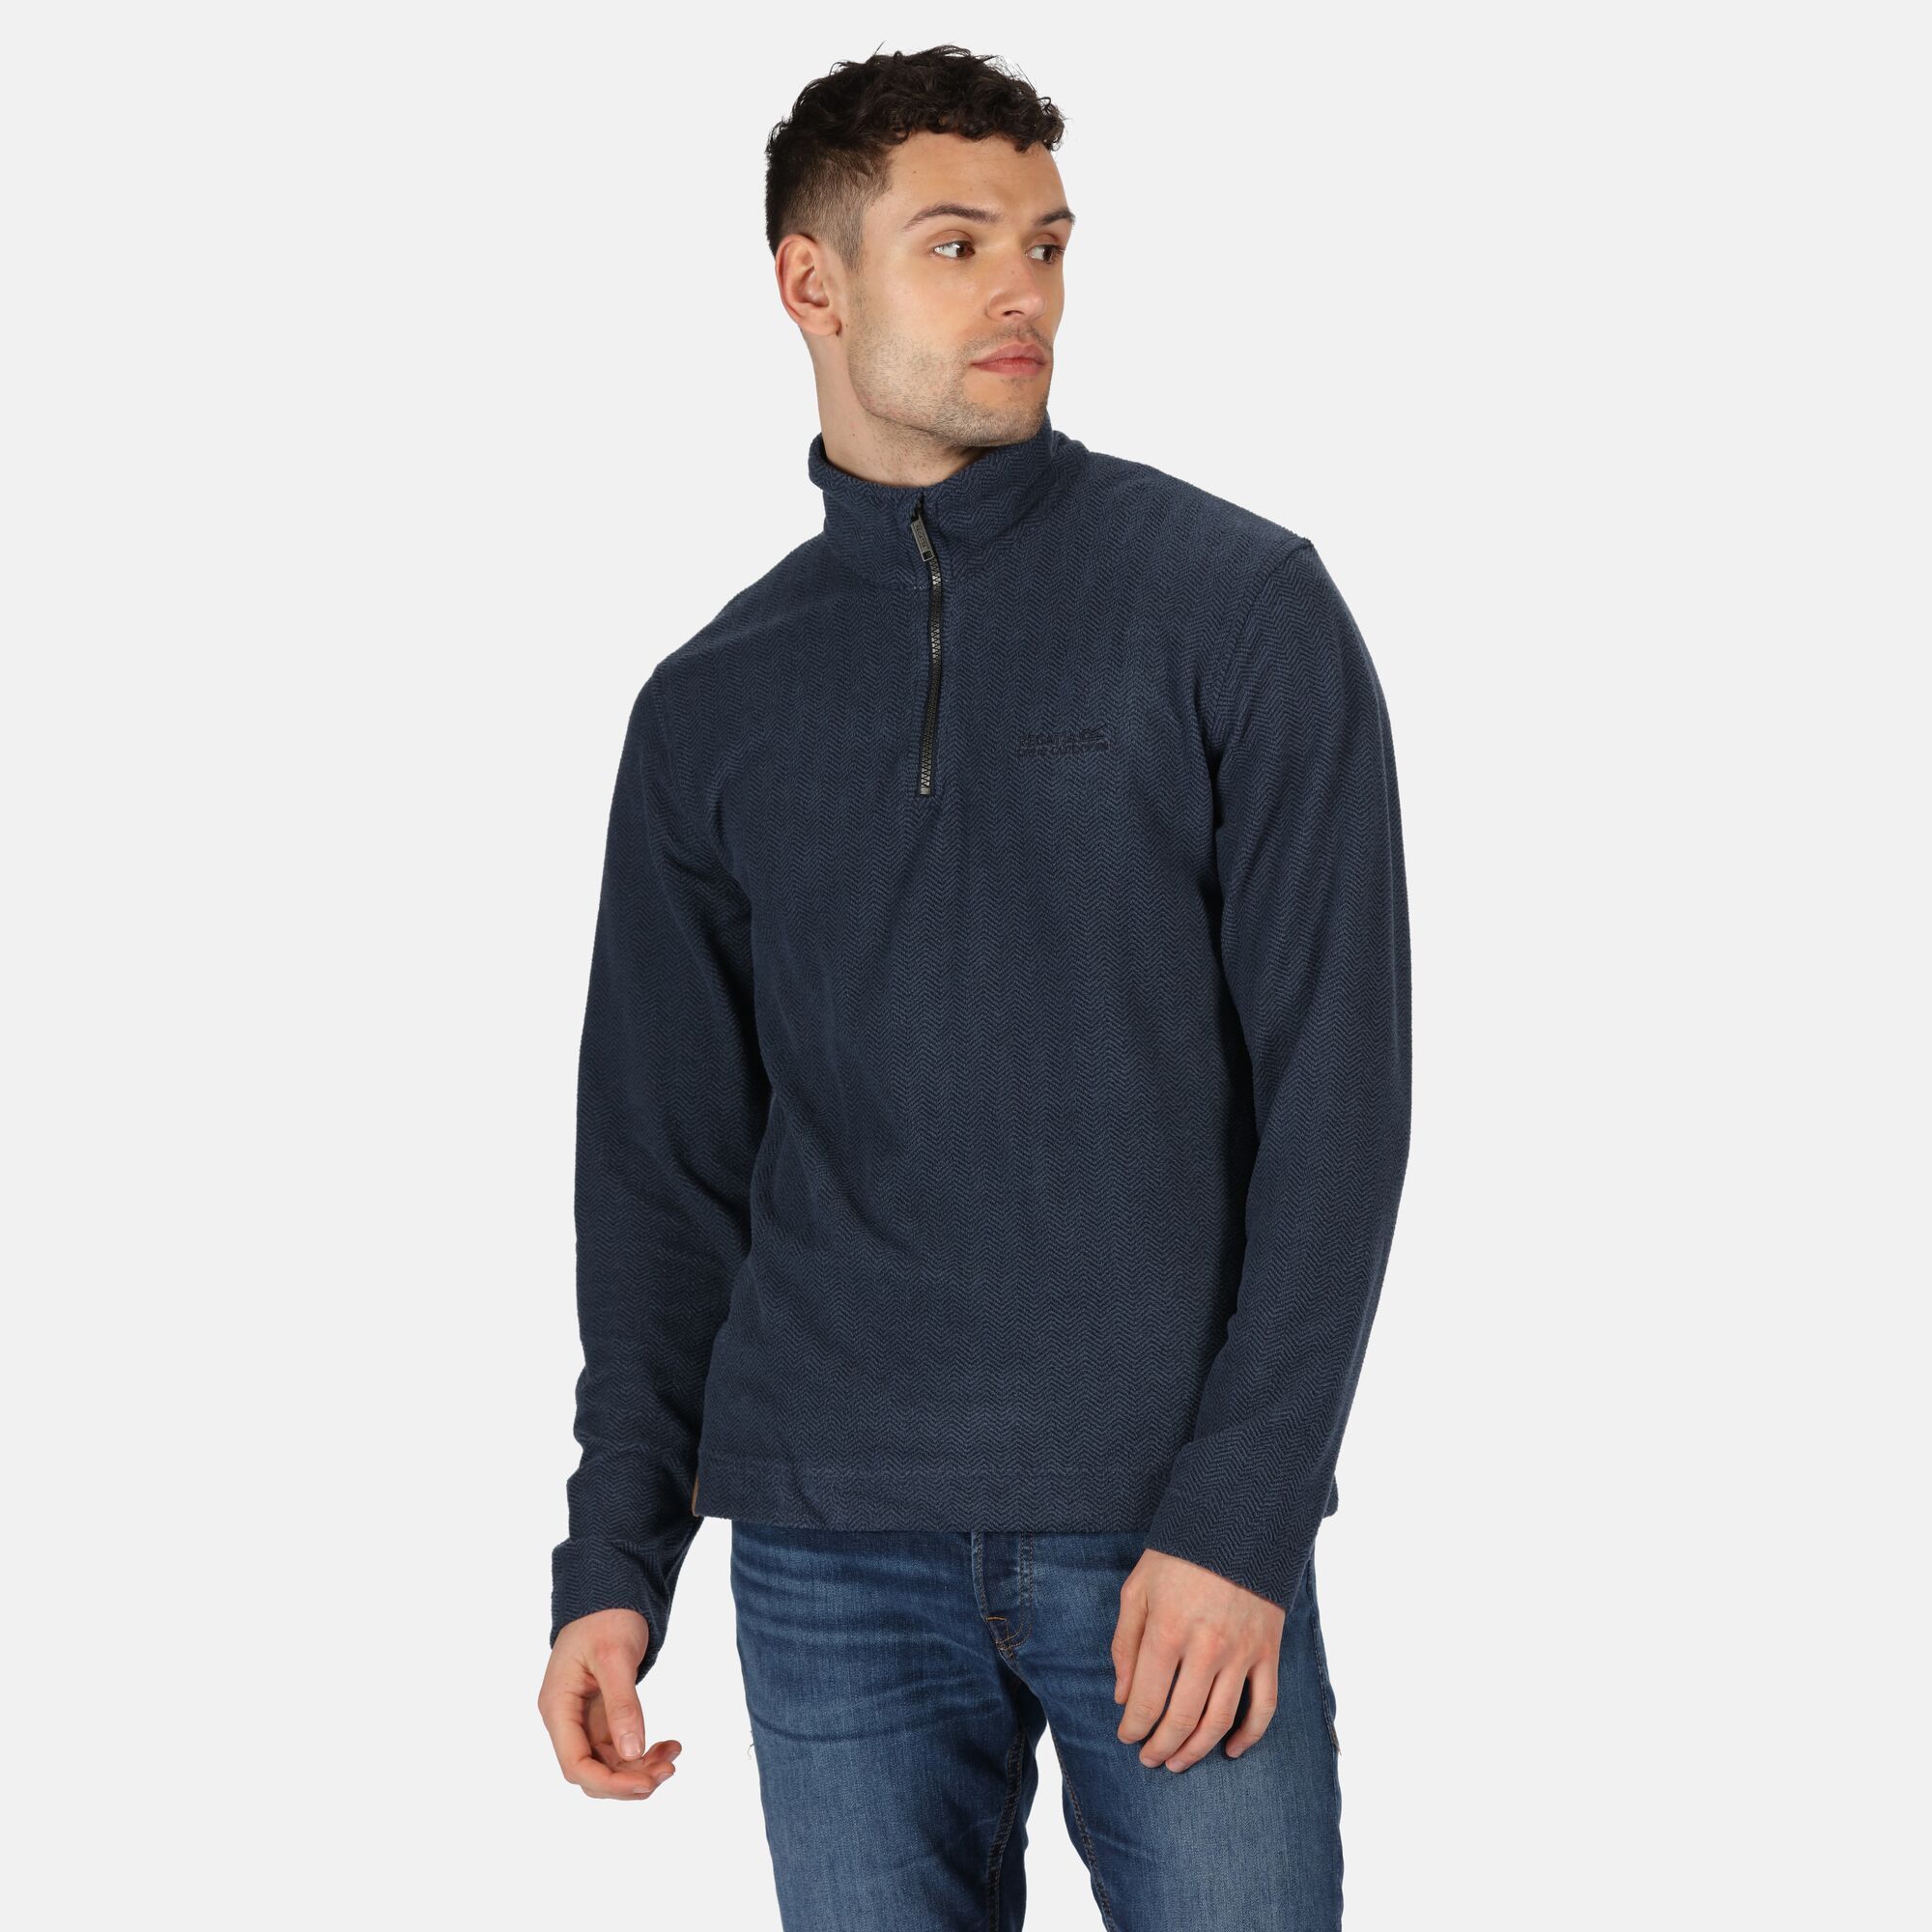 Material: 96% Polyester, 4% Elastane. Lightweight fleece pullover with a subtle herringbone pattern and zip neck. Breeze blocking stand collar. Regatta outdoors badge on the left sleeve.